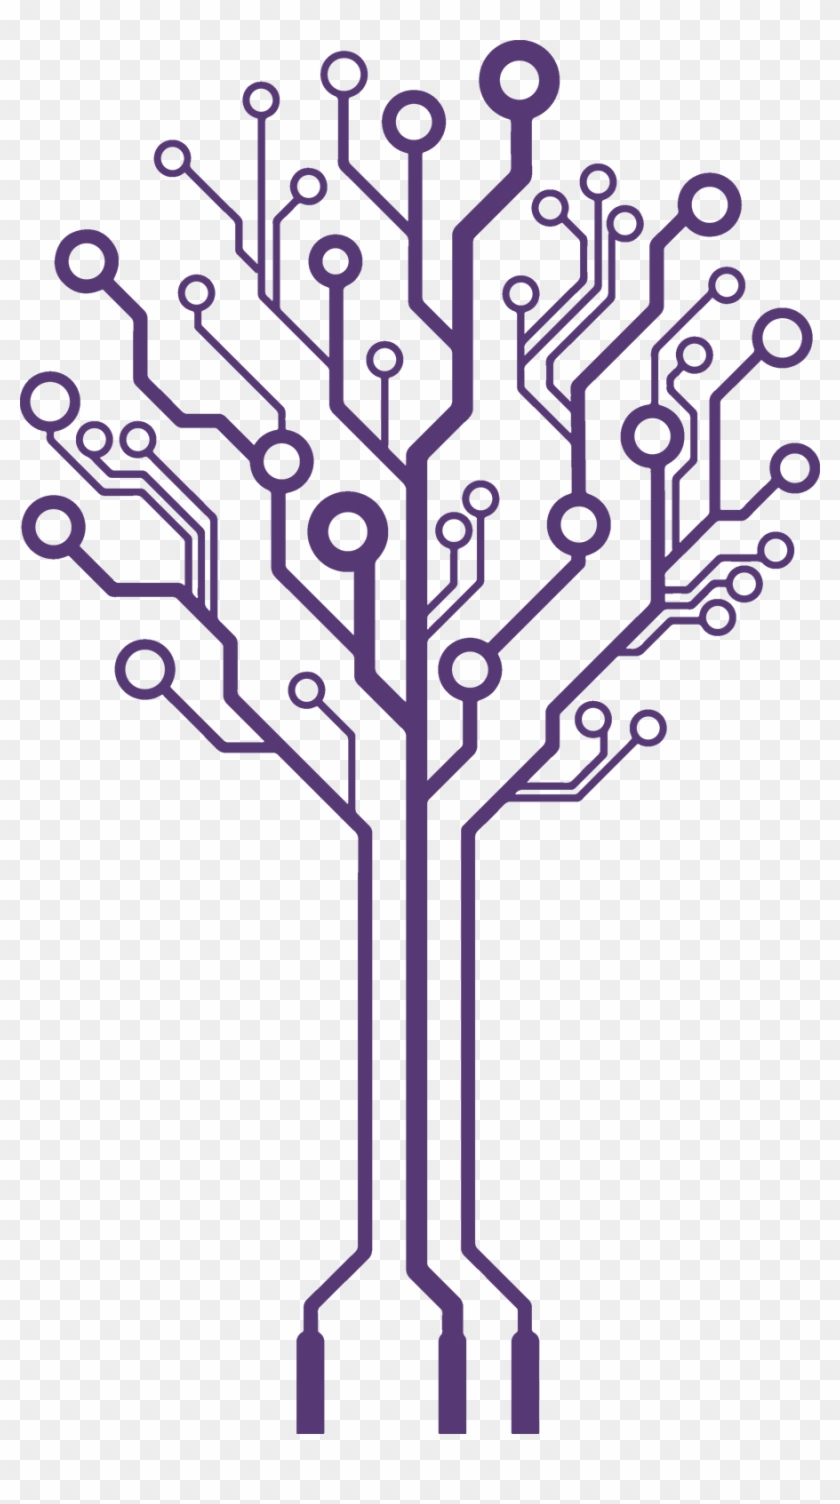 Circuit Tree Png - Circuit Board Pattern Tree Clipart #147883